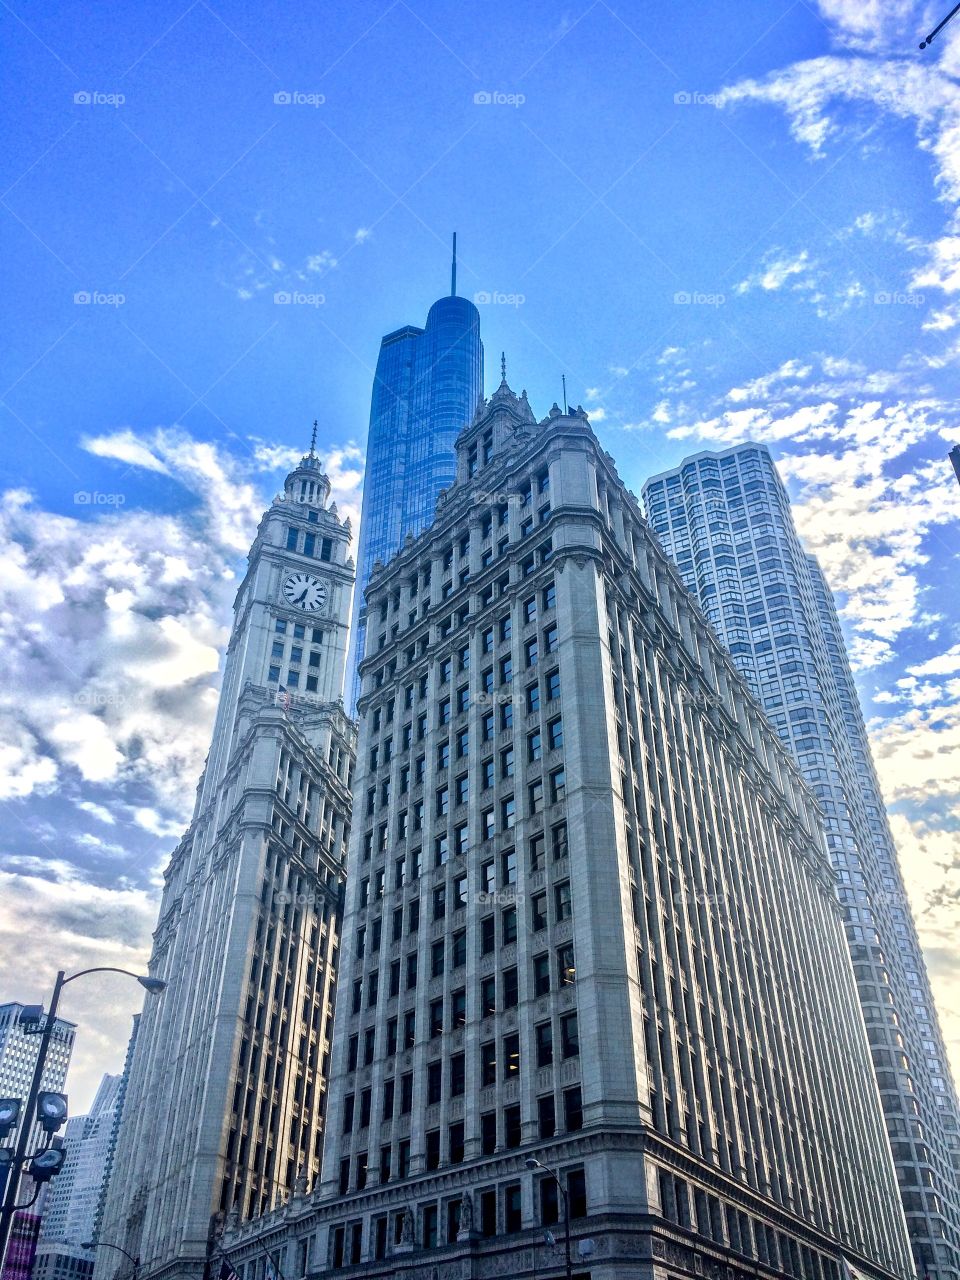 Building in Chicago, including the Trump Tower  